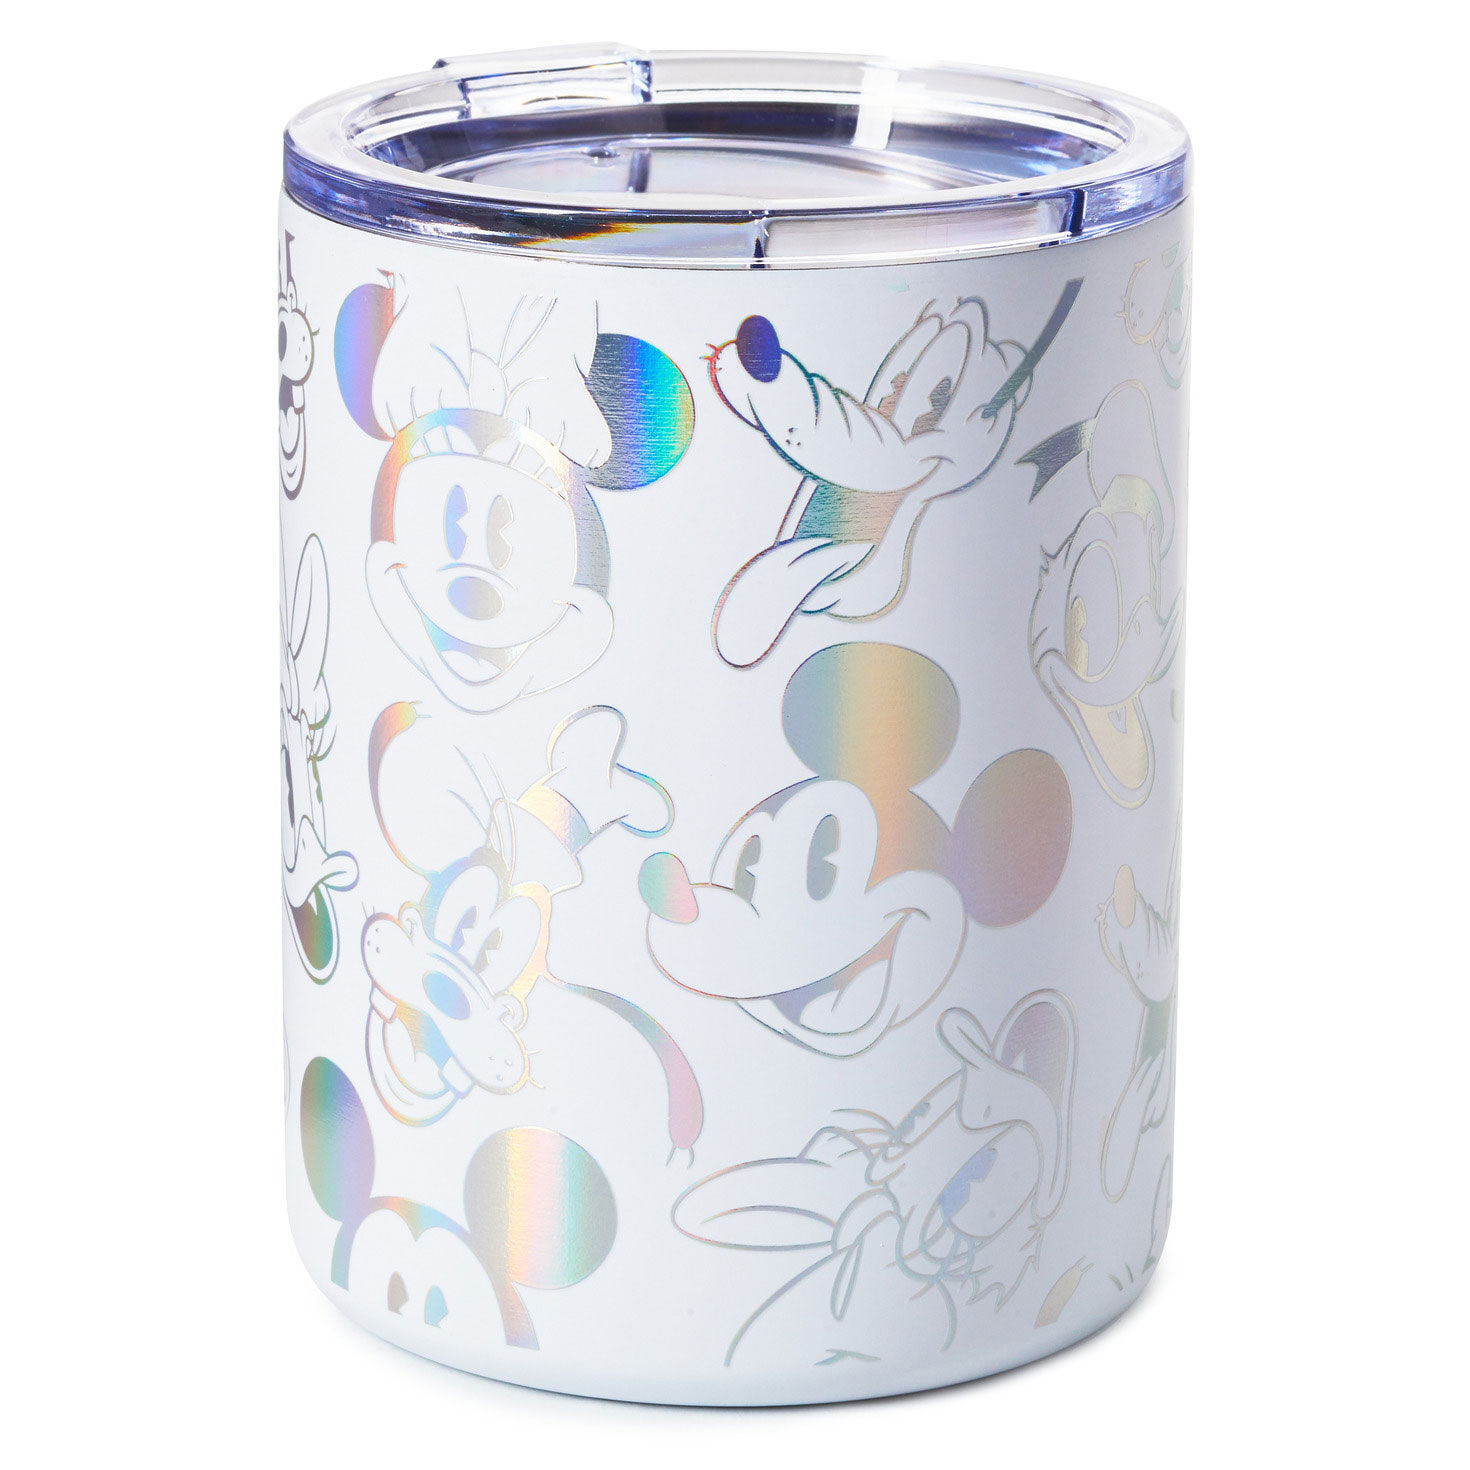 https://www.hallmark.com/dw/image/v2/AALB_PRD/on/demandware.static/-/Sites-hallmark-master/default/dw3811b558/images/finished-goods/products/1DYG2083/Mickey-and-Friends-Iridescent-Insulated-Mug_1DYG2083_01.jpg?sfrm=jpg